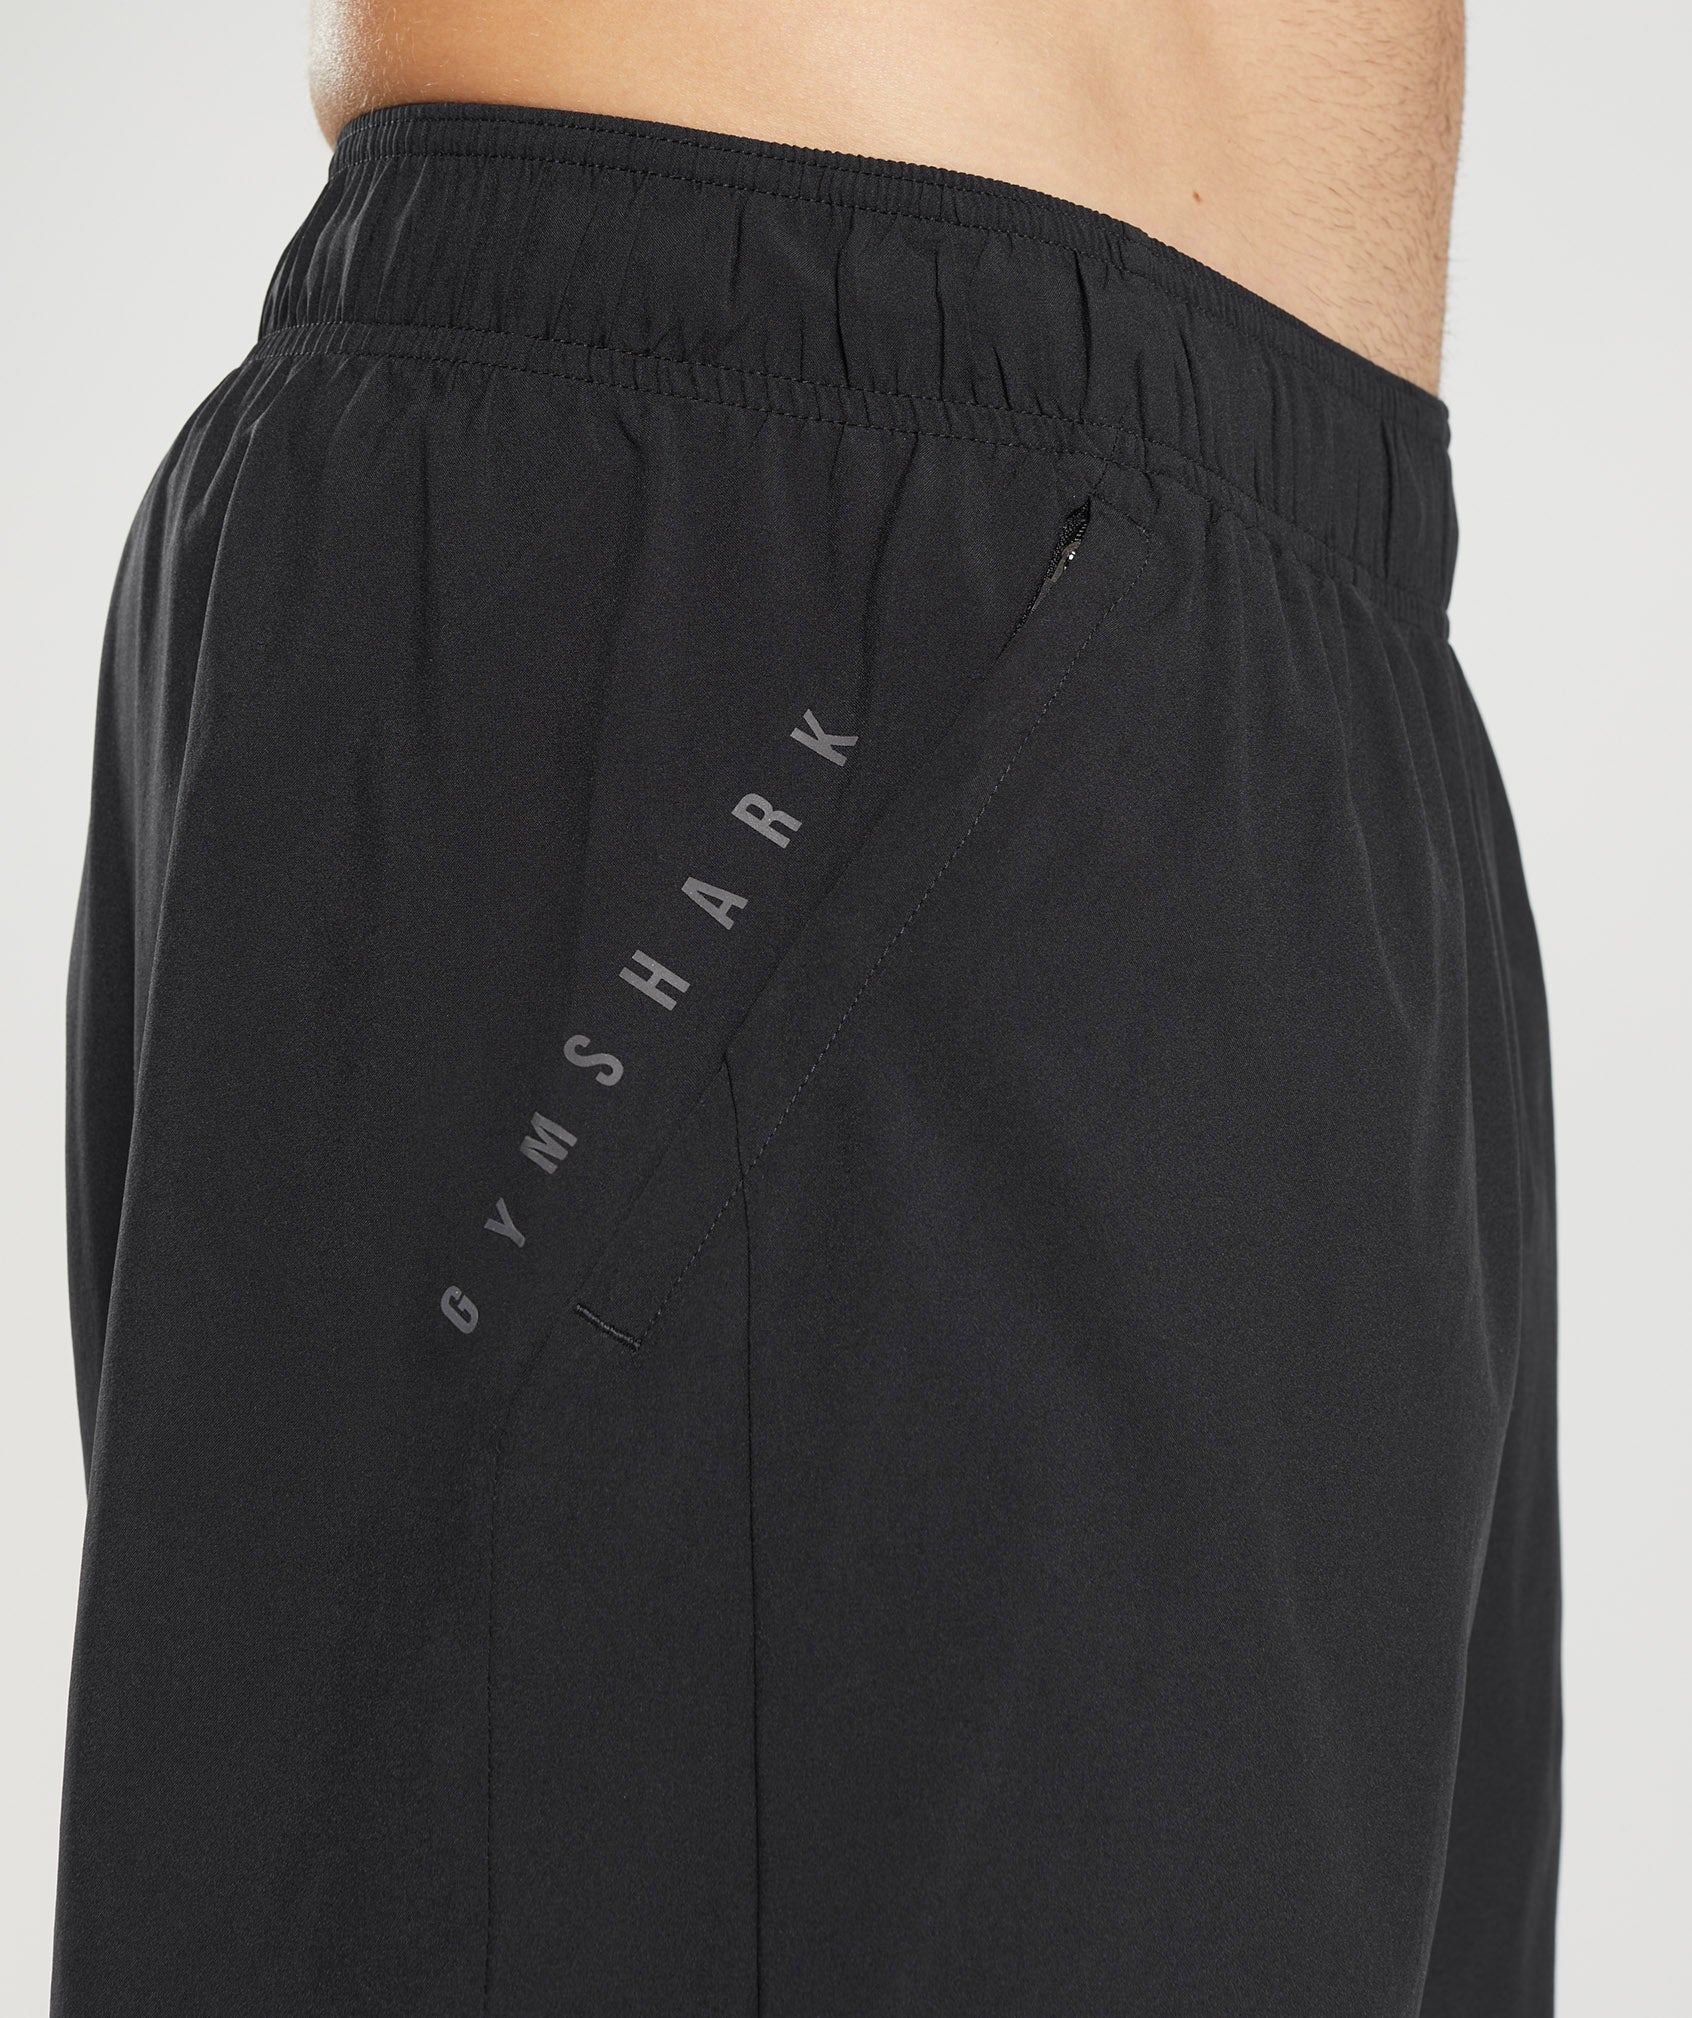 Sport 7" 2 In 1 Shorts in Black/Silhouette Grey - view 5